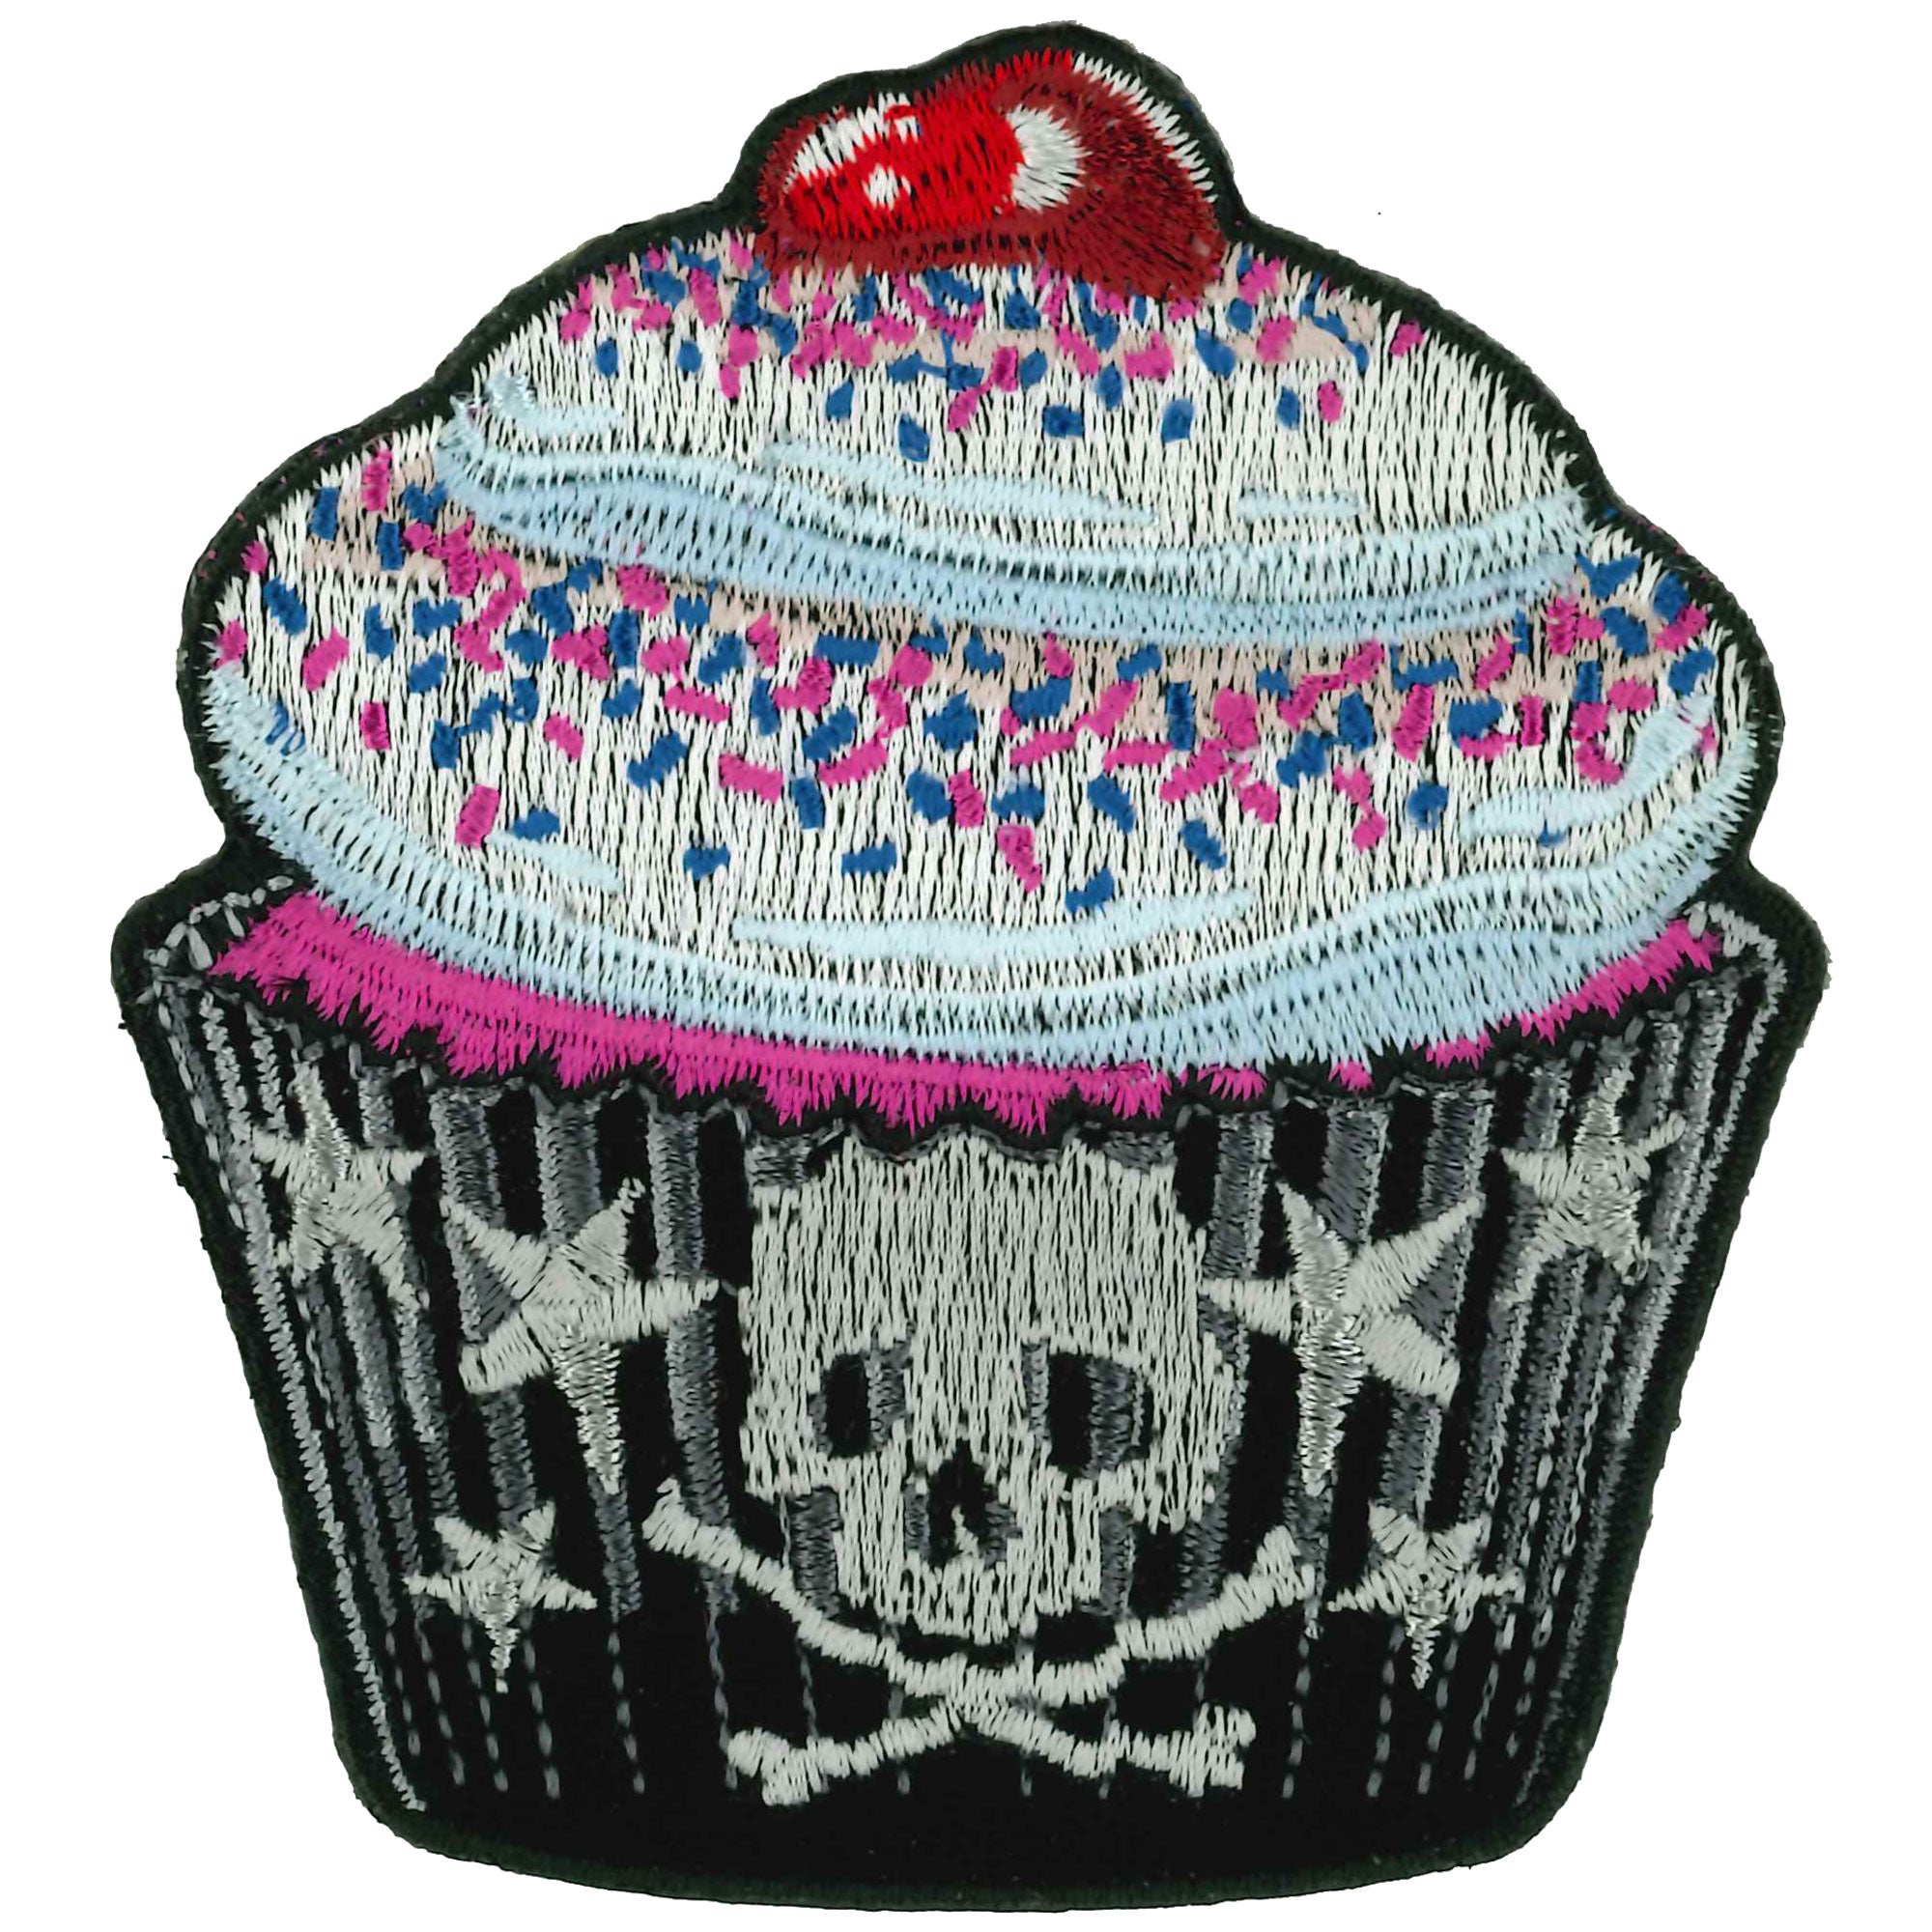 Hot Leathers Cupcake Skull 3.25" Patch